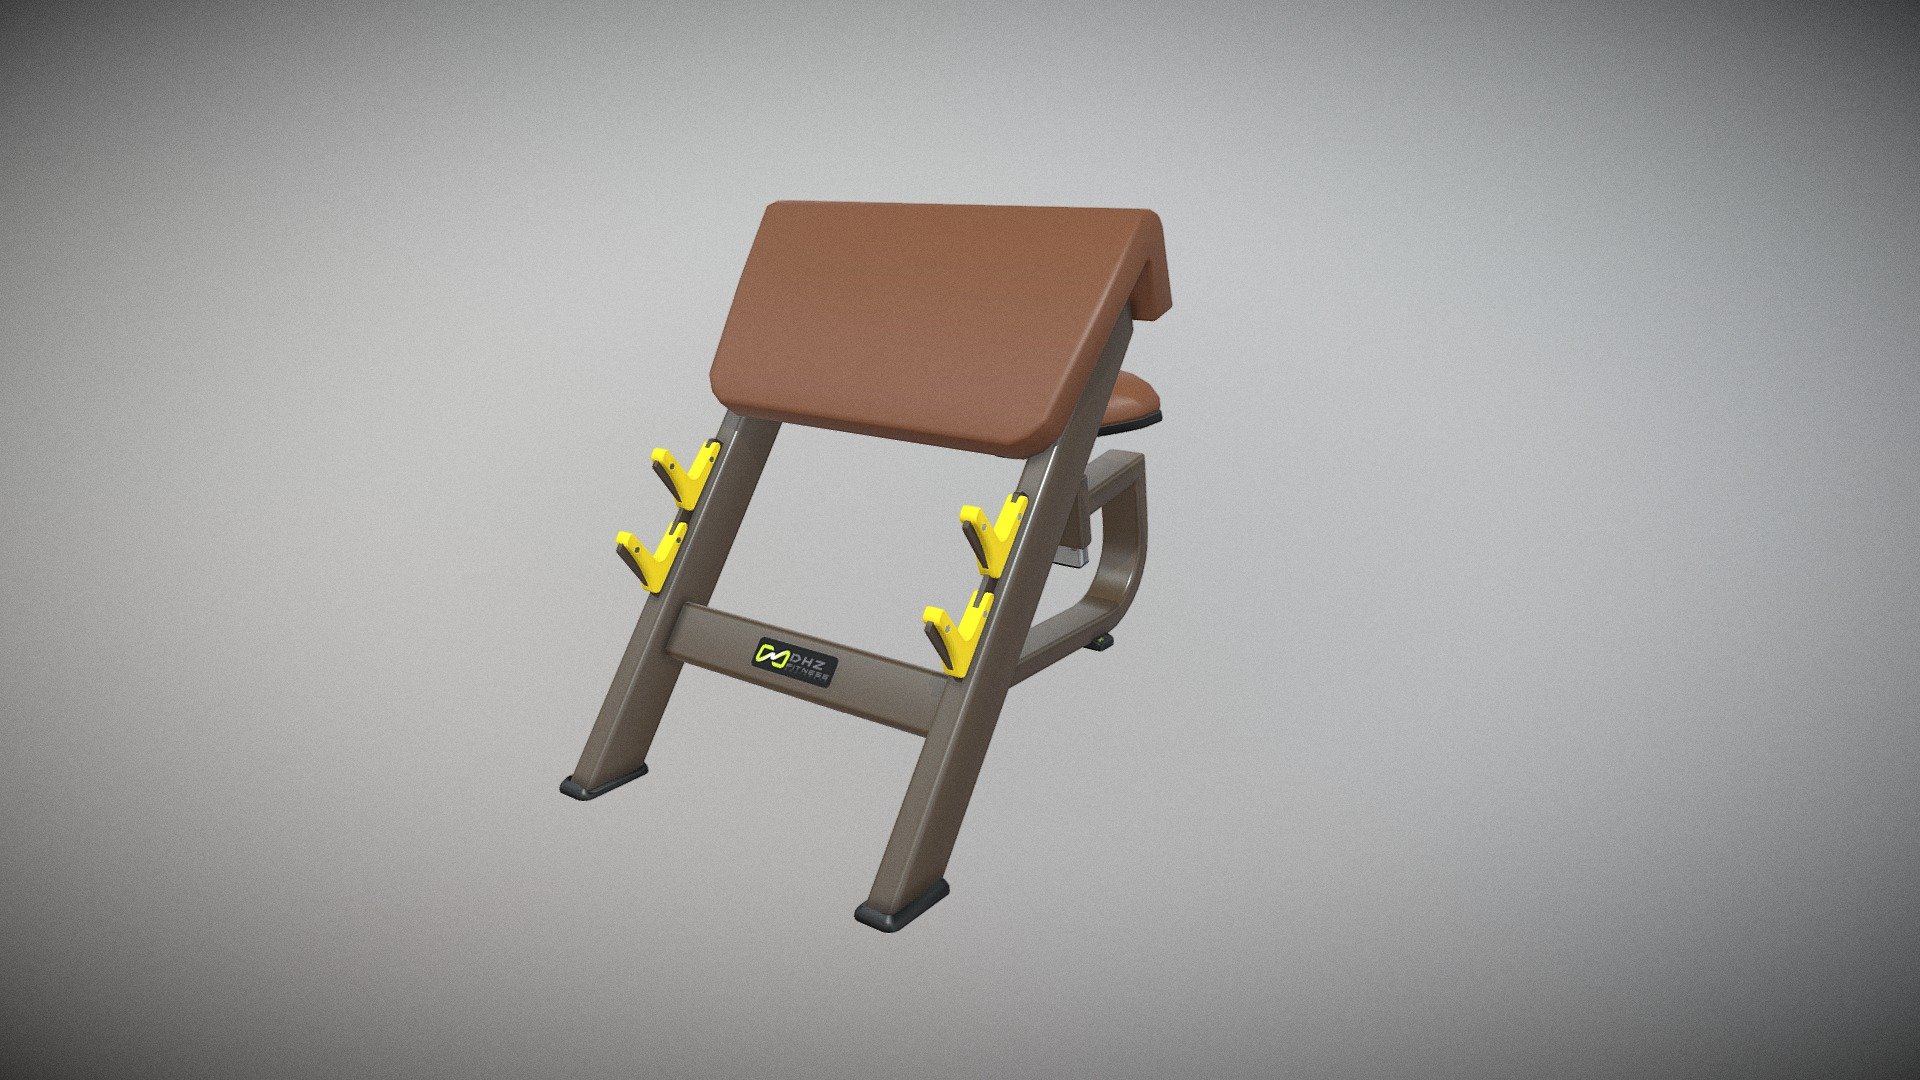 http://dhz-fitness.de/style-1#E1044 - SEATED PREACHER CURL - 3D model by supersport-fitness 3d model